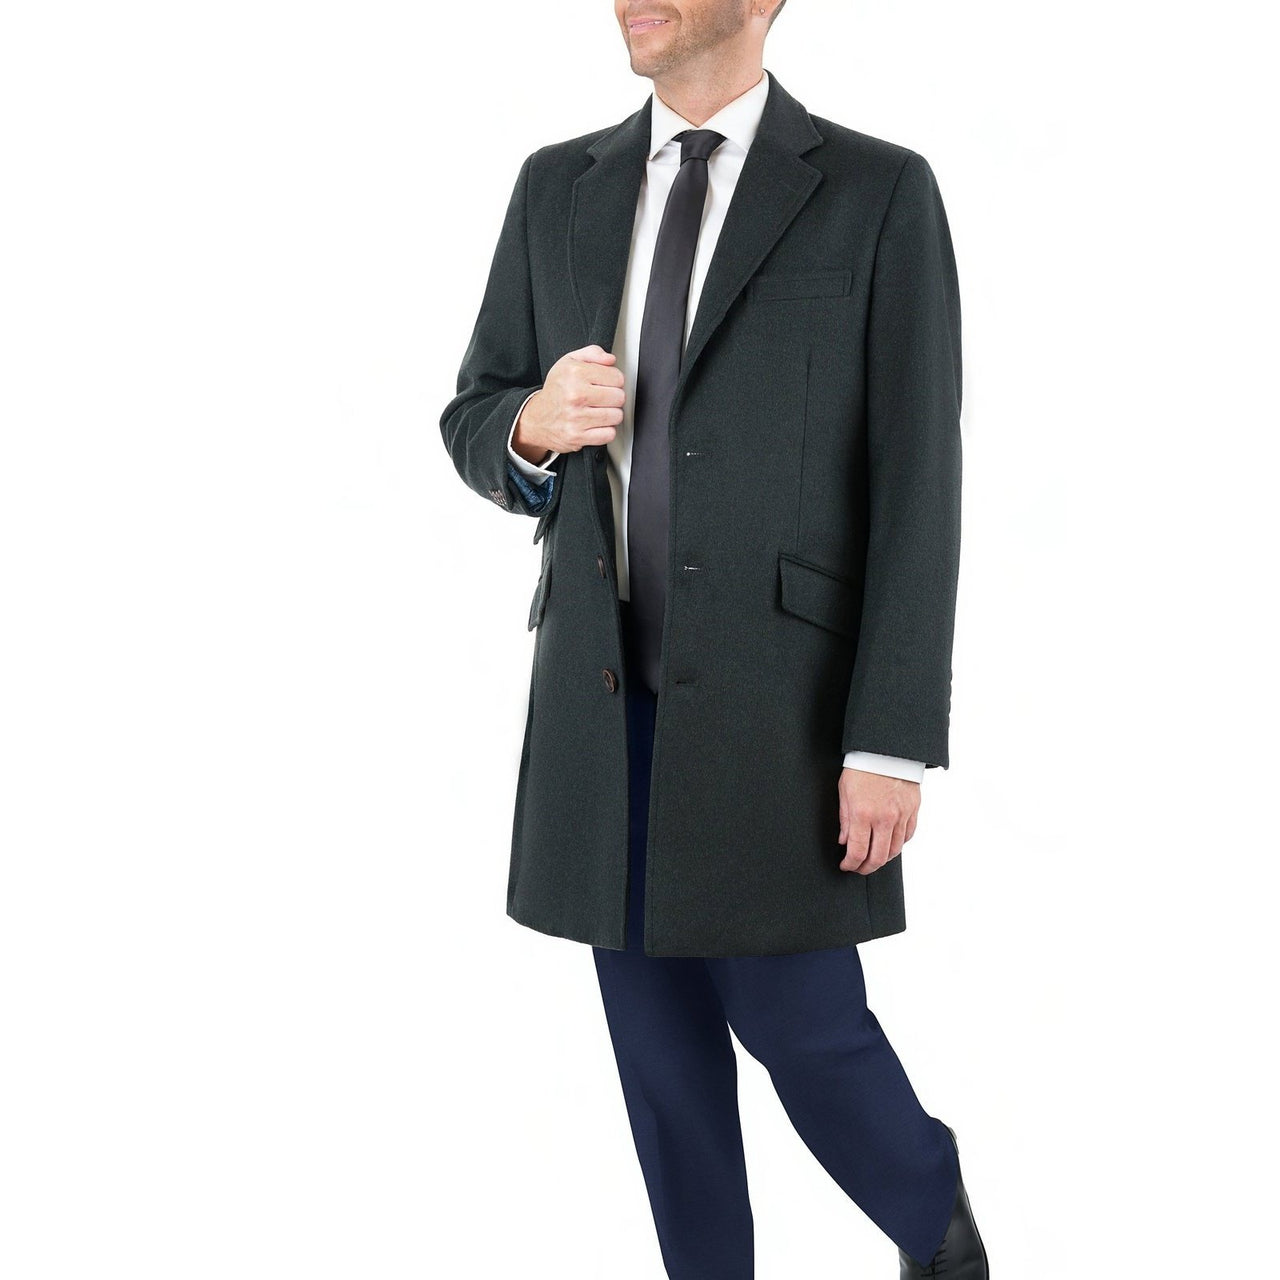 Arthur Black OUTERWEAR The Suit Depot Men's Wool Cashmere Single Breasted Hunter Green 3/4 Length Top Coat